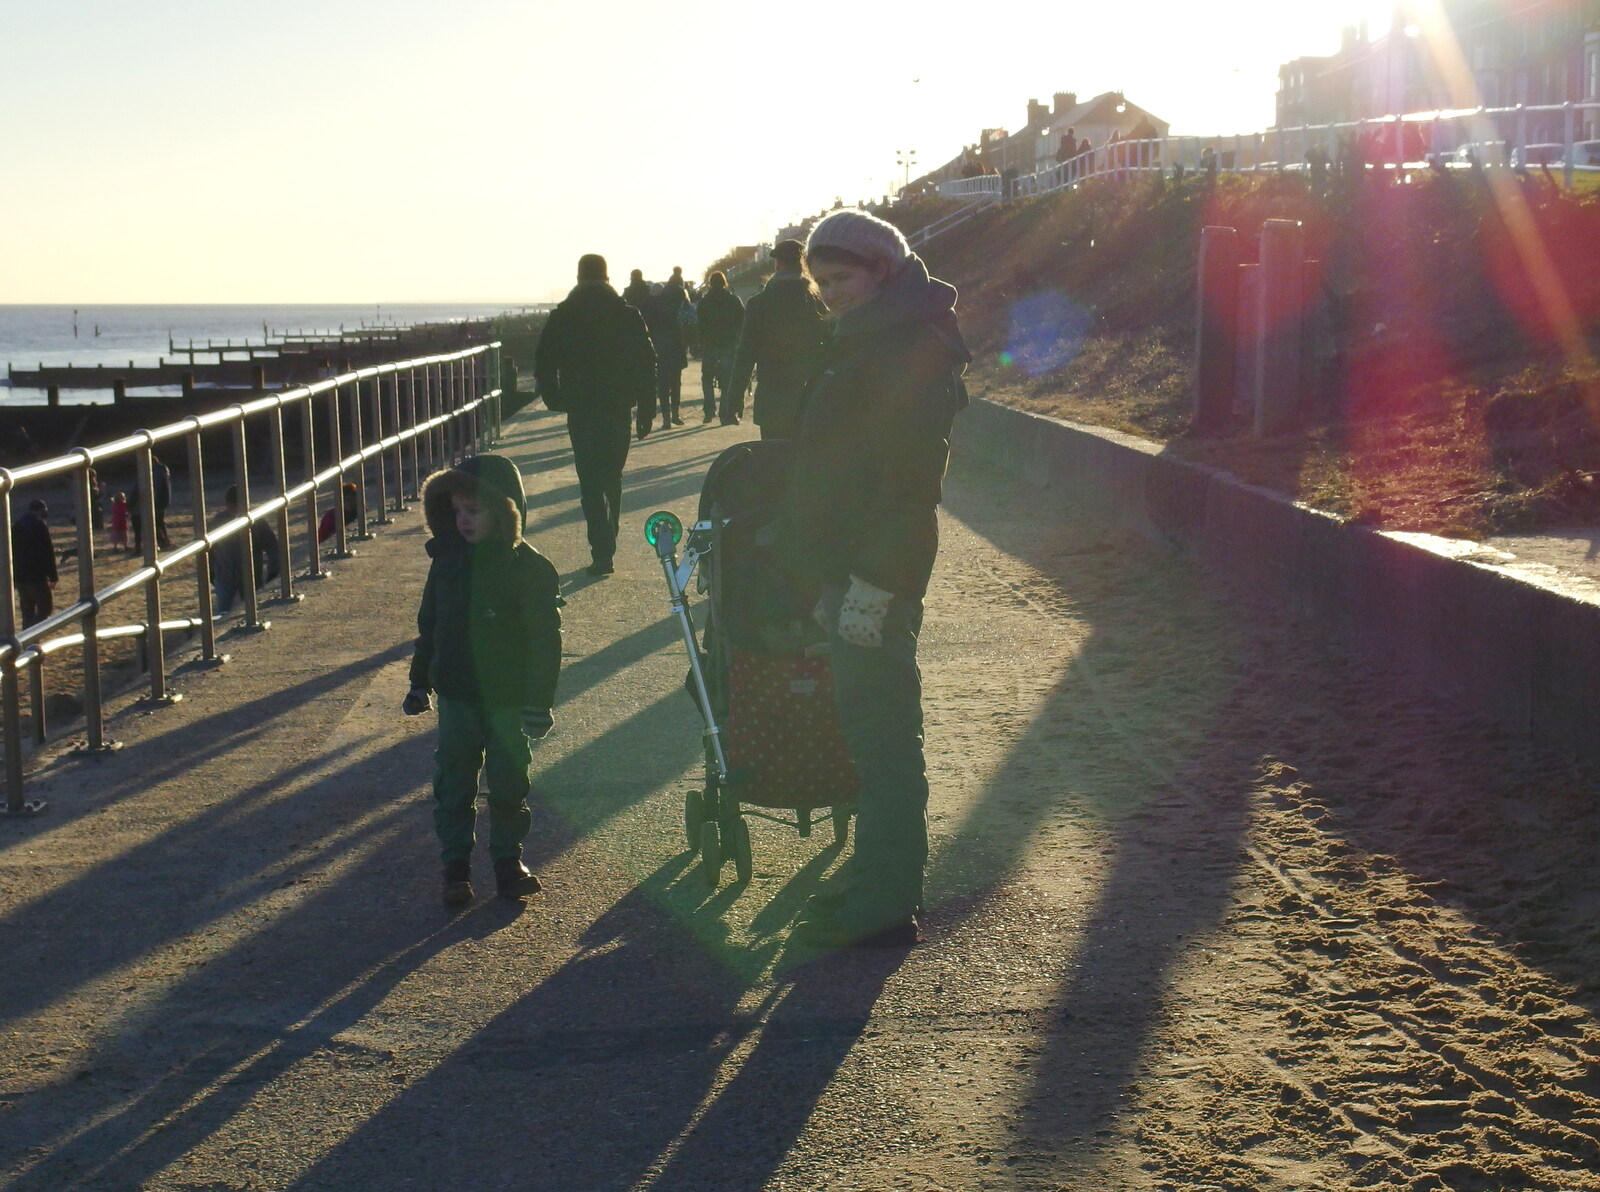 Fred, Harry and Isobel on the prom from Post-Christmas Southwold, Suffolk - 29th December 2013